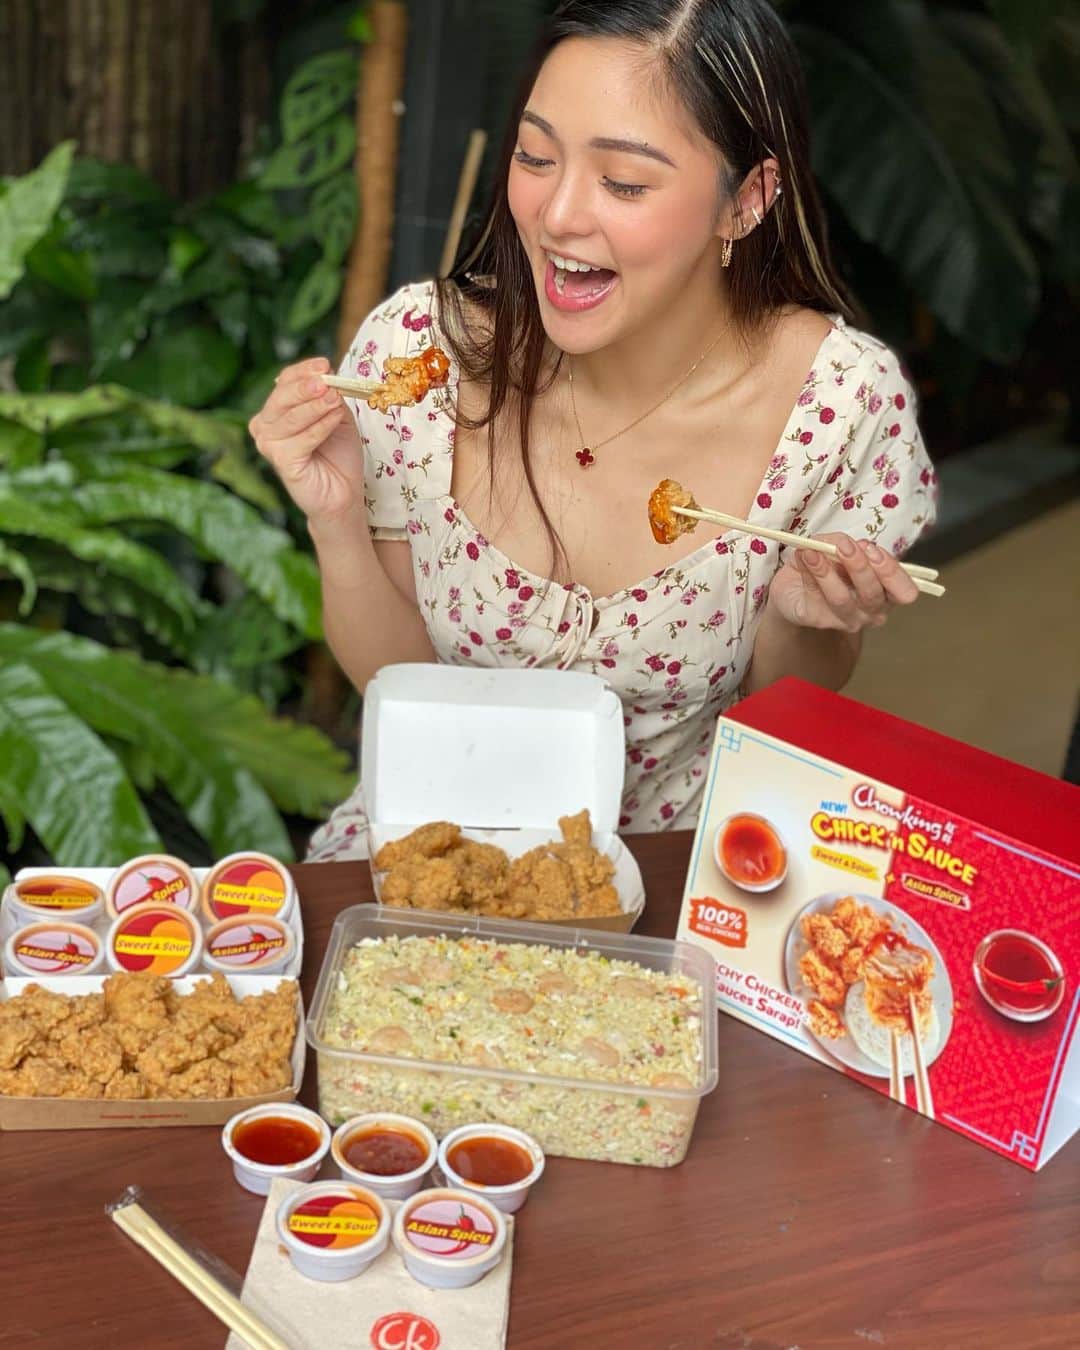 Kim Chiuさんのインスタグラム写真 - (Kim ChiuInstagram)「MY ULTIMATE COMFORT FOOD!!!❤️ @chowkingph good food really puts you in a good mood!!!🥰. . . New addition to my favorites in @chowkingph is the 𝑪𝑯𝑶𝑾𝑲𝑰𝑵𝑮 𝑪𝑯𝑰𝑪𝑲 𝒏’ 𝑺𝑨𝑼𝑪𝑬 made with 100% 𝐑𝐄𝐀𝐋 𝑪𝐇𝐈𝐂𝐊𝐄𝐍 it comes in two flavors of sauce 𝑺𝑾𝑬𝑬𝑻 𝒂𝒏𝒅 𝑺𝑶𝑼𝑹 𝒂𝒏𝒅 𝒎𝒚 𝒑𝒆𝒓𝒔𝒐𝒏𝒂𝒍 𝒇𝒂𝒗𝒆 𝒕𝒉𝒆 𝑨𝑺𝑰𝑨𝑵 𝑺𝑷𝑰𝑪𝒀!!! Soooo good!!! Nakaka happy!!!❤️. . . Order your CHOWKING CHICK N SAUCE NOW in your nearest Chowking branch or you can call for delivery the CHOWKING HOTLINE 9-88-88, grab food, food panda and lala food!!! Tara LETS CHAO!!!!❤️❤️❤️ soooooo gooood!!!!❤️. #ChowkingChicknSauce #ChowWithChiu」11月10日 13時22分 - chinitaprincess